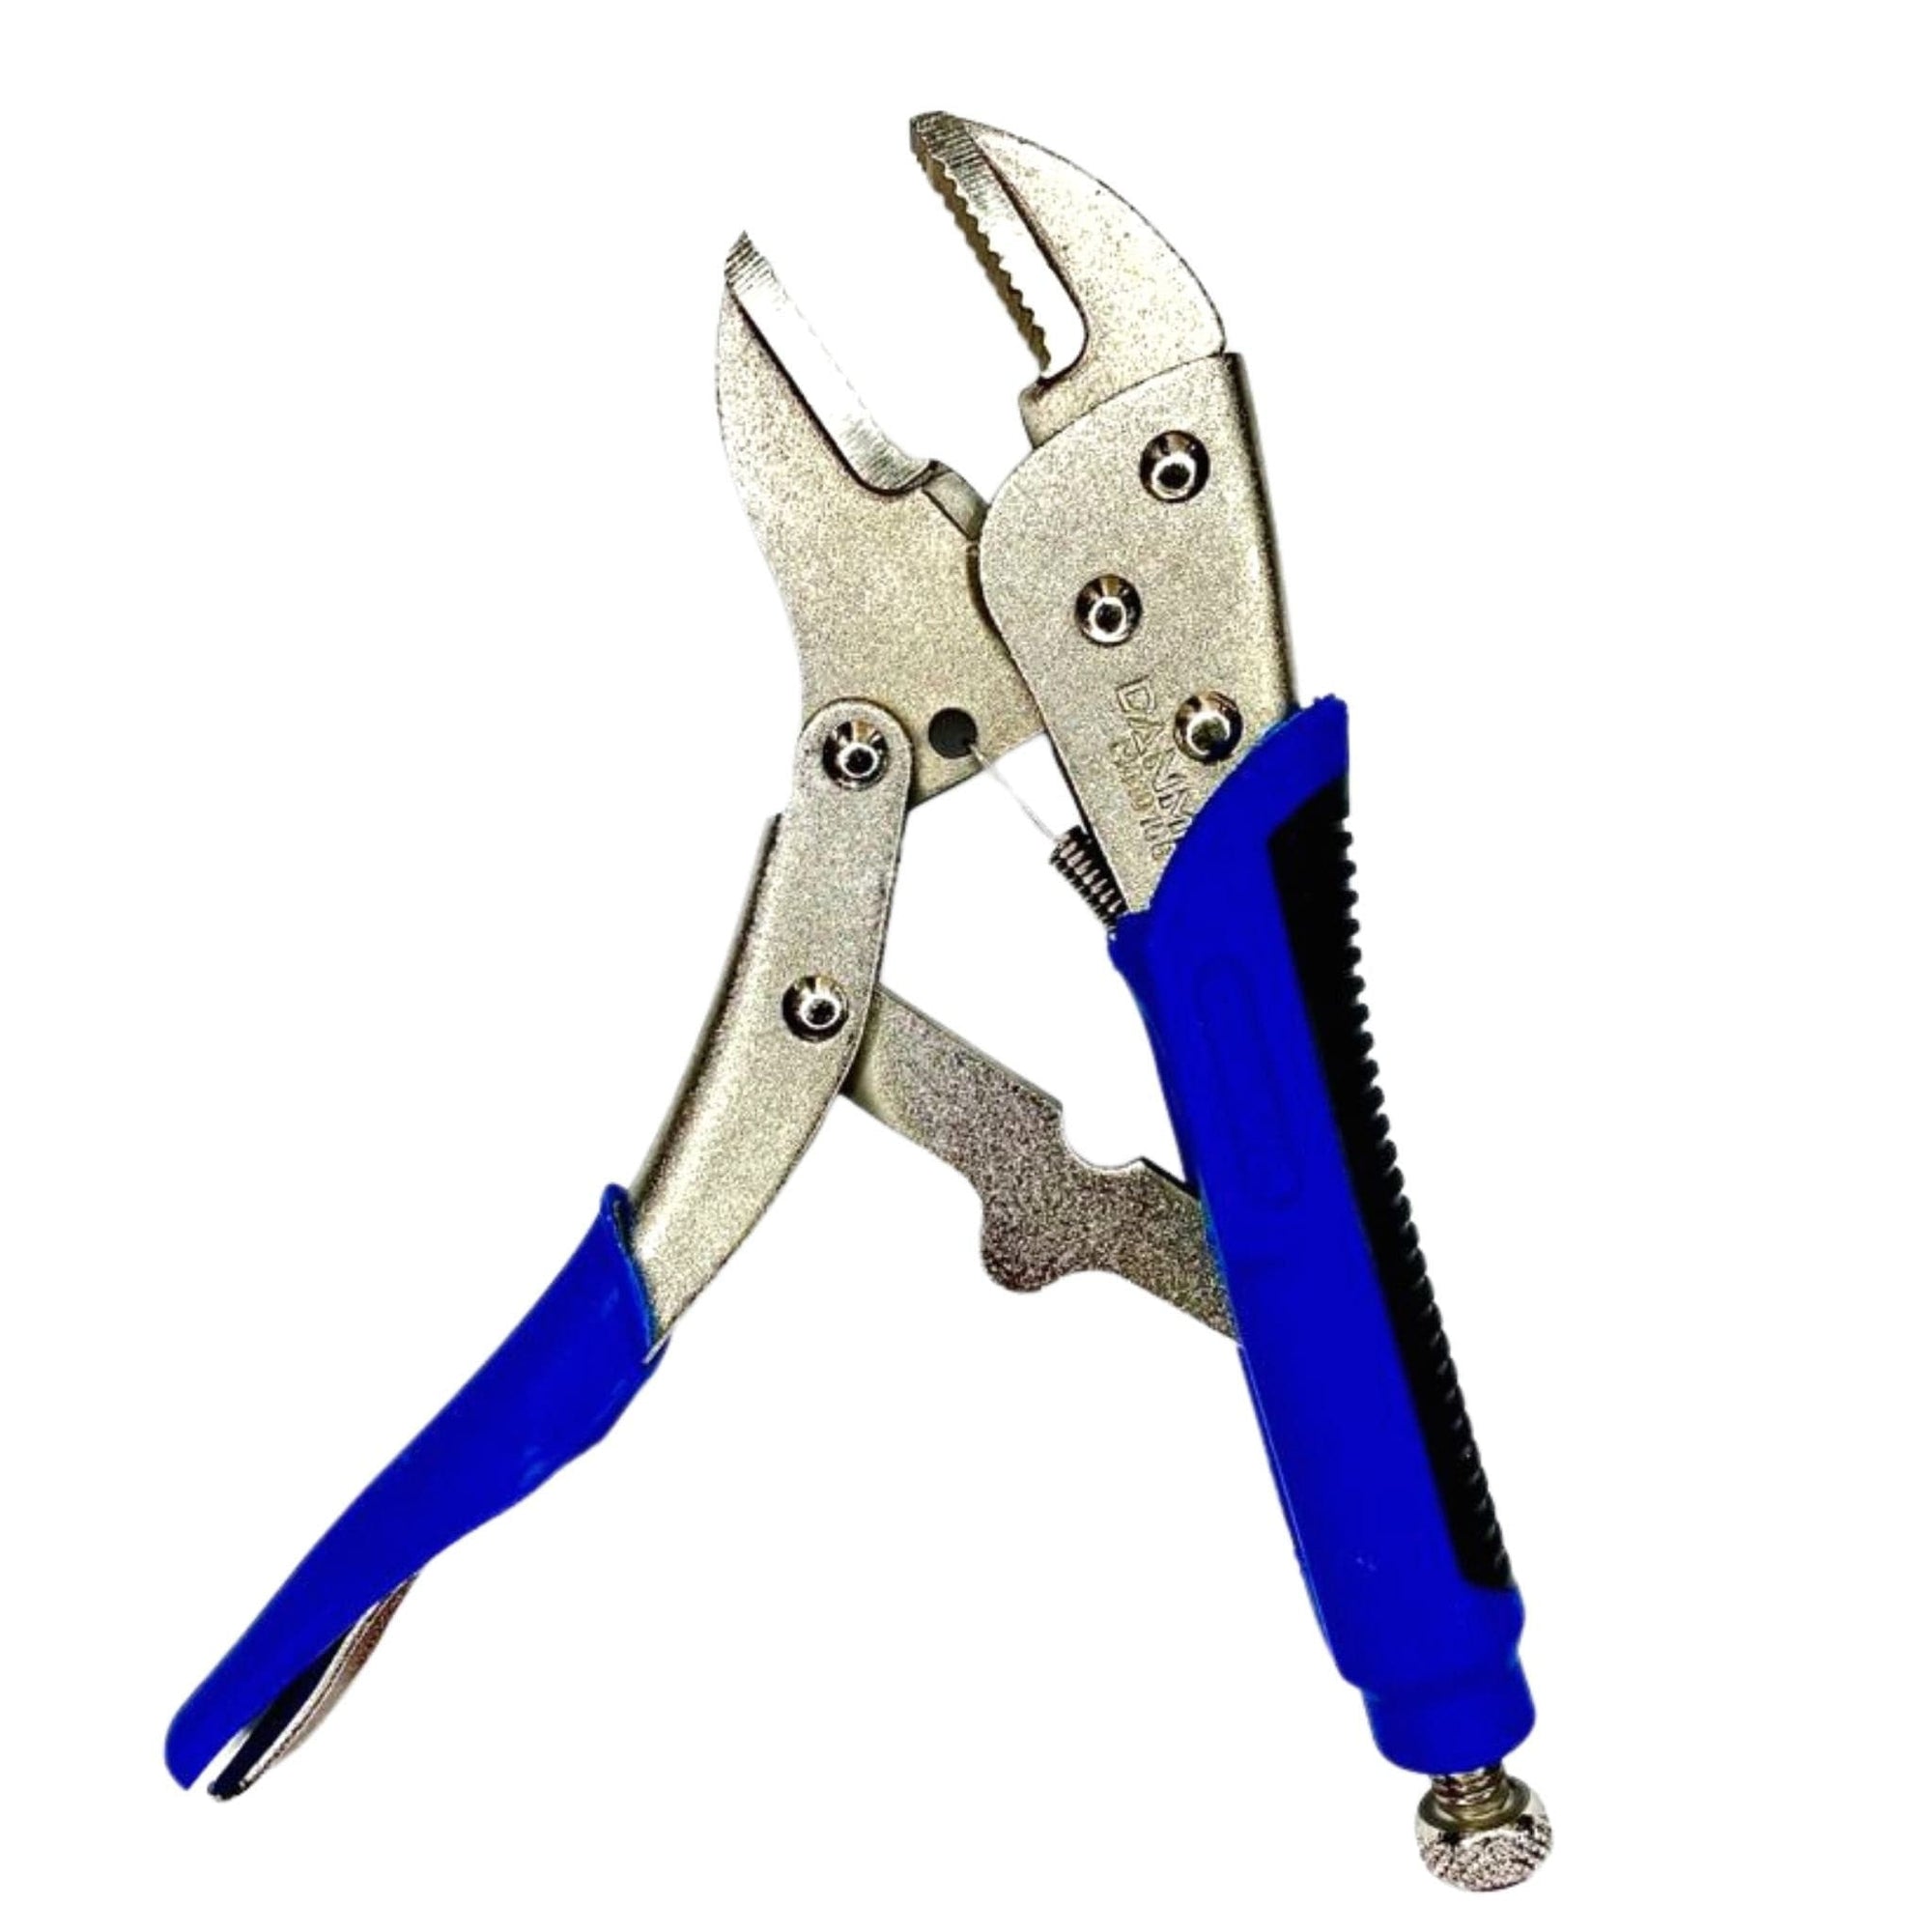 10” 250mm locking plier with rubber grip - South East Clearance Centre